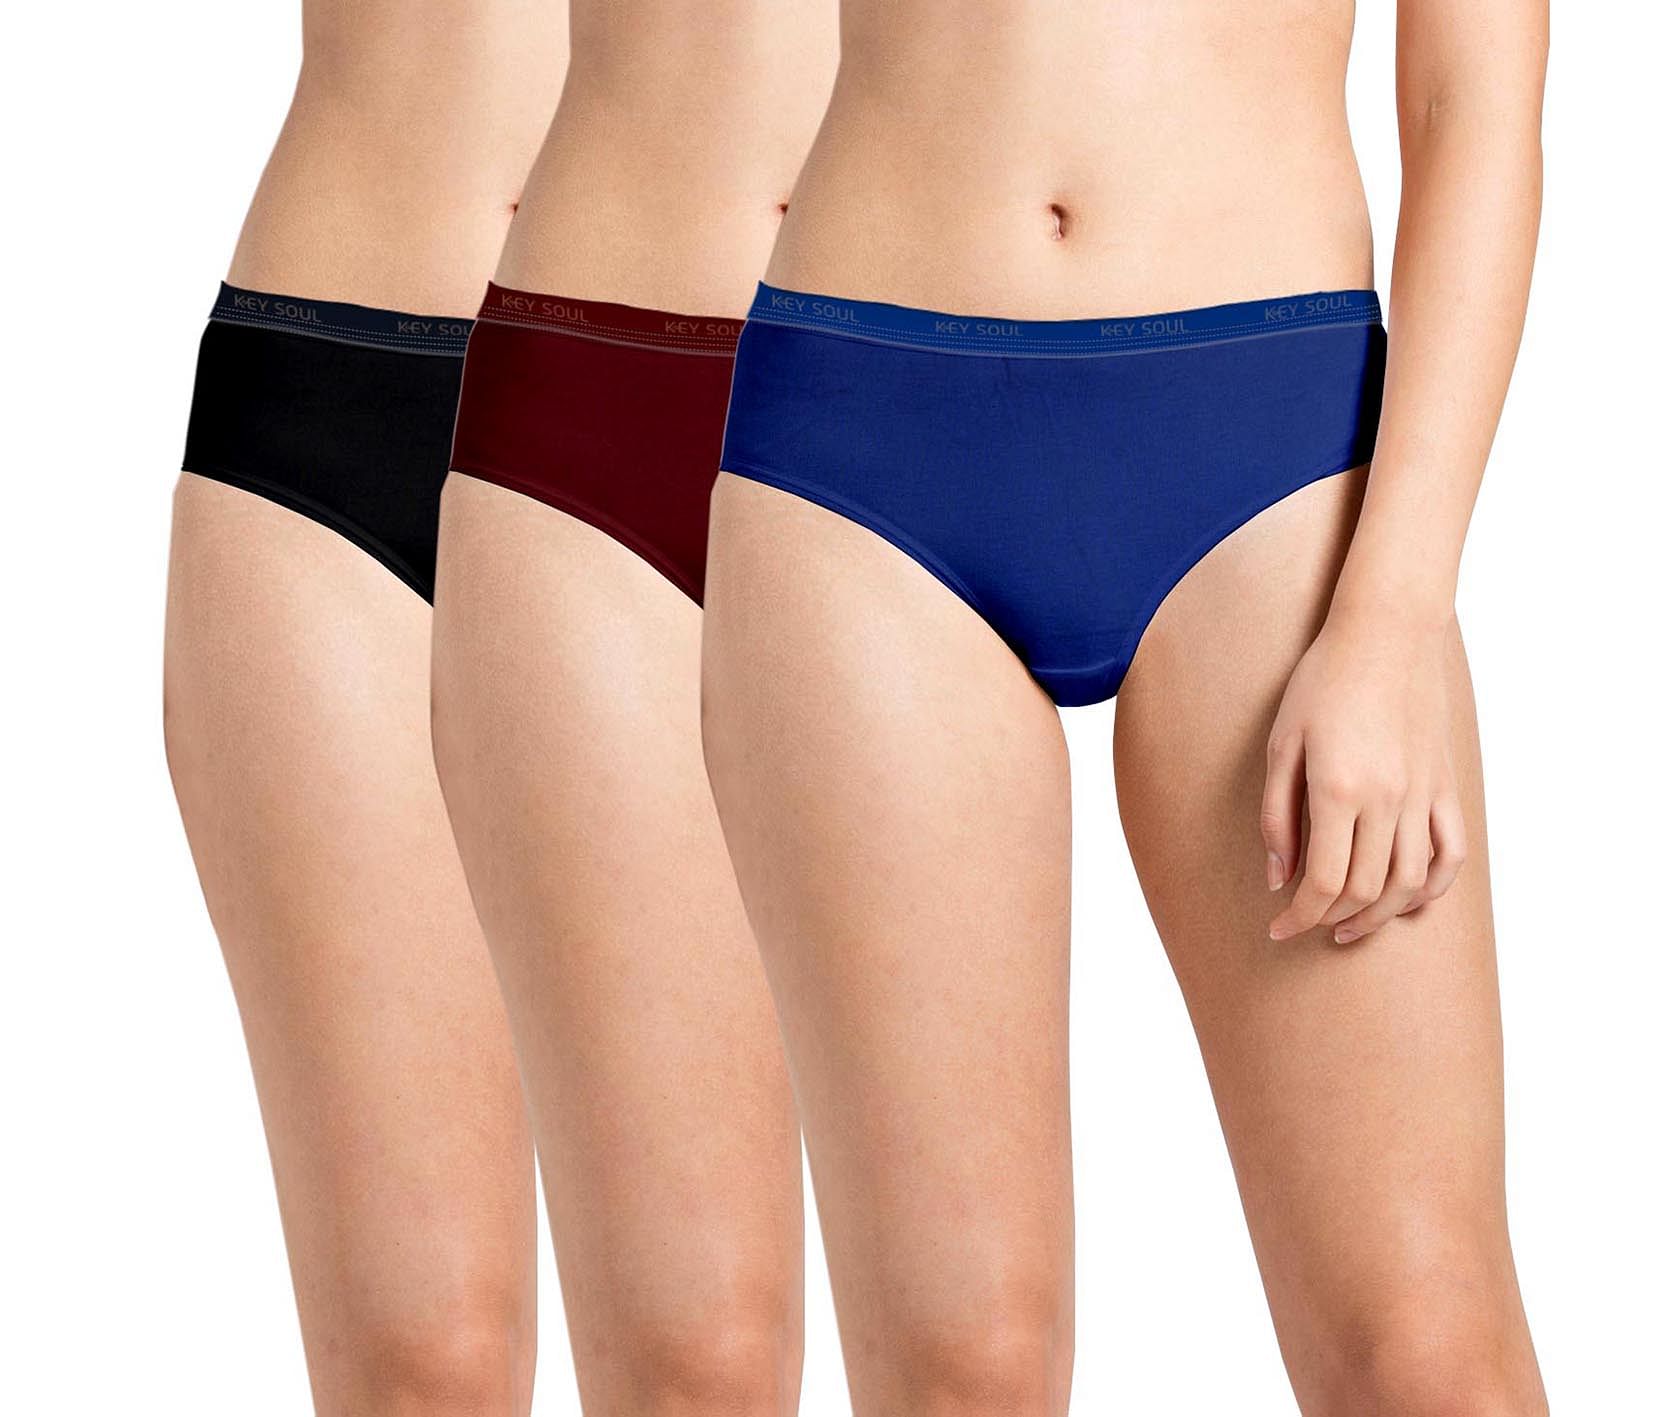 Wmn Panty KS001-P-O3-SOLID PACK 10 3XL SIZE ONLY